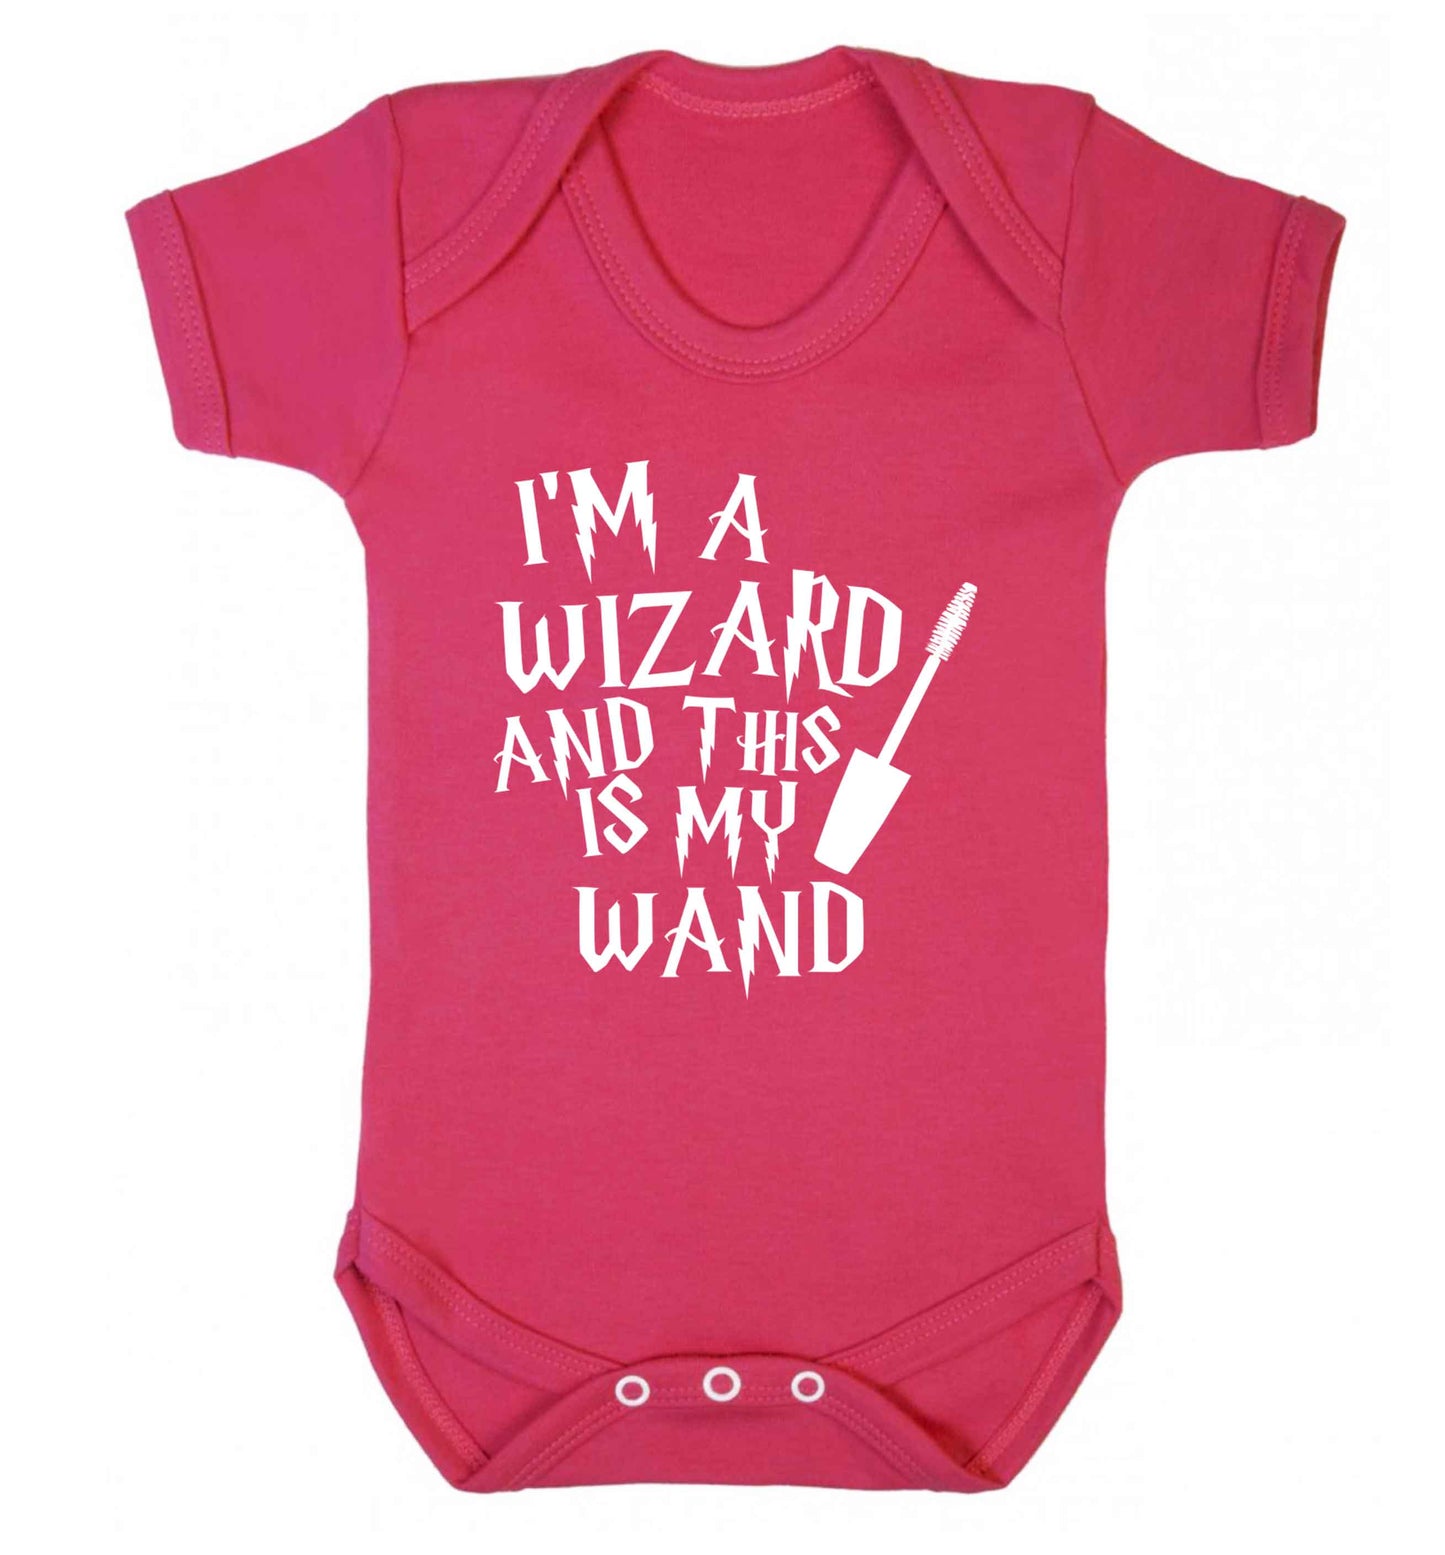 I'm a wizard and this is my wand Baby Vest dark pink 18-24 months